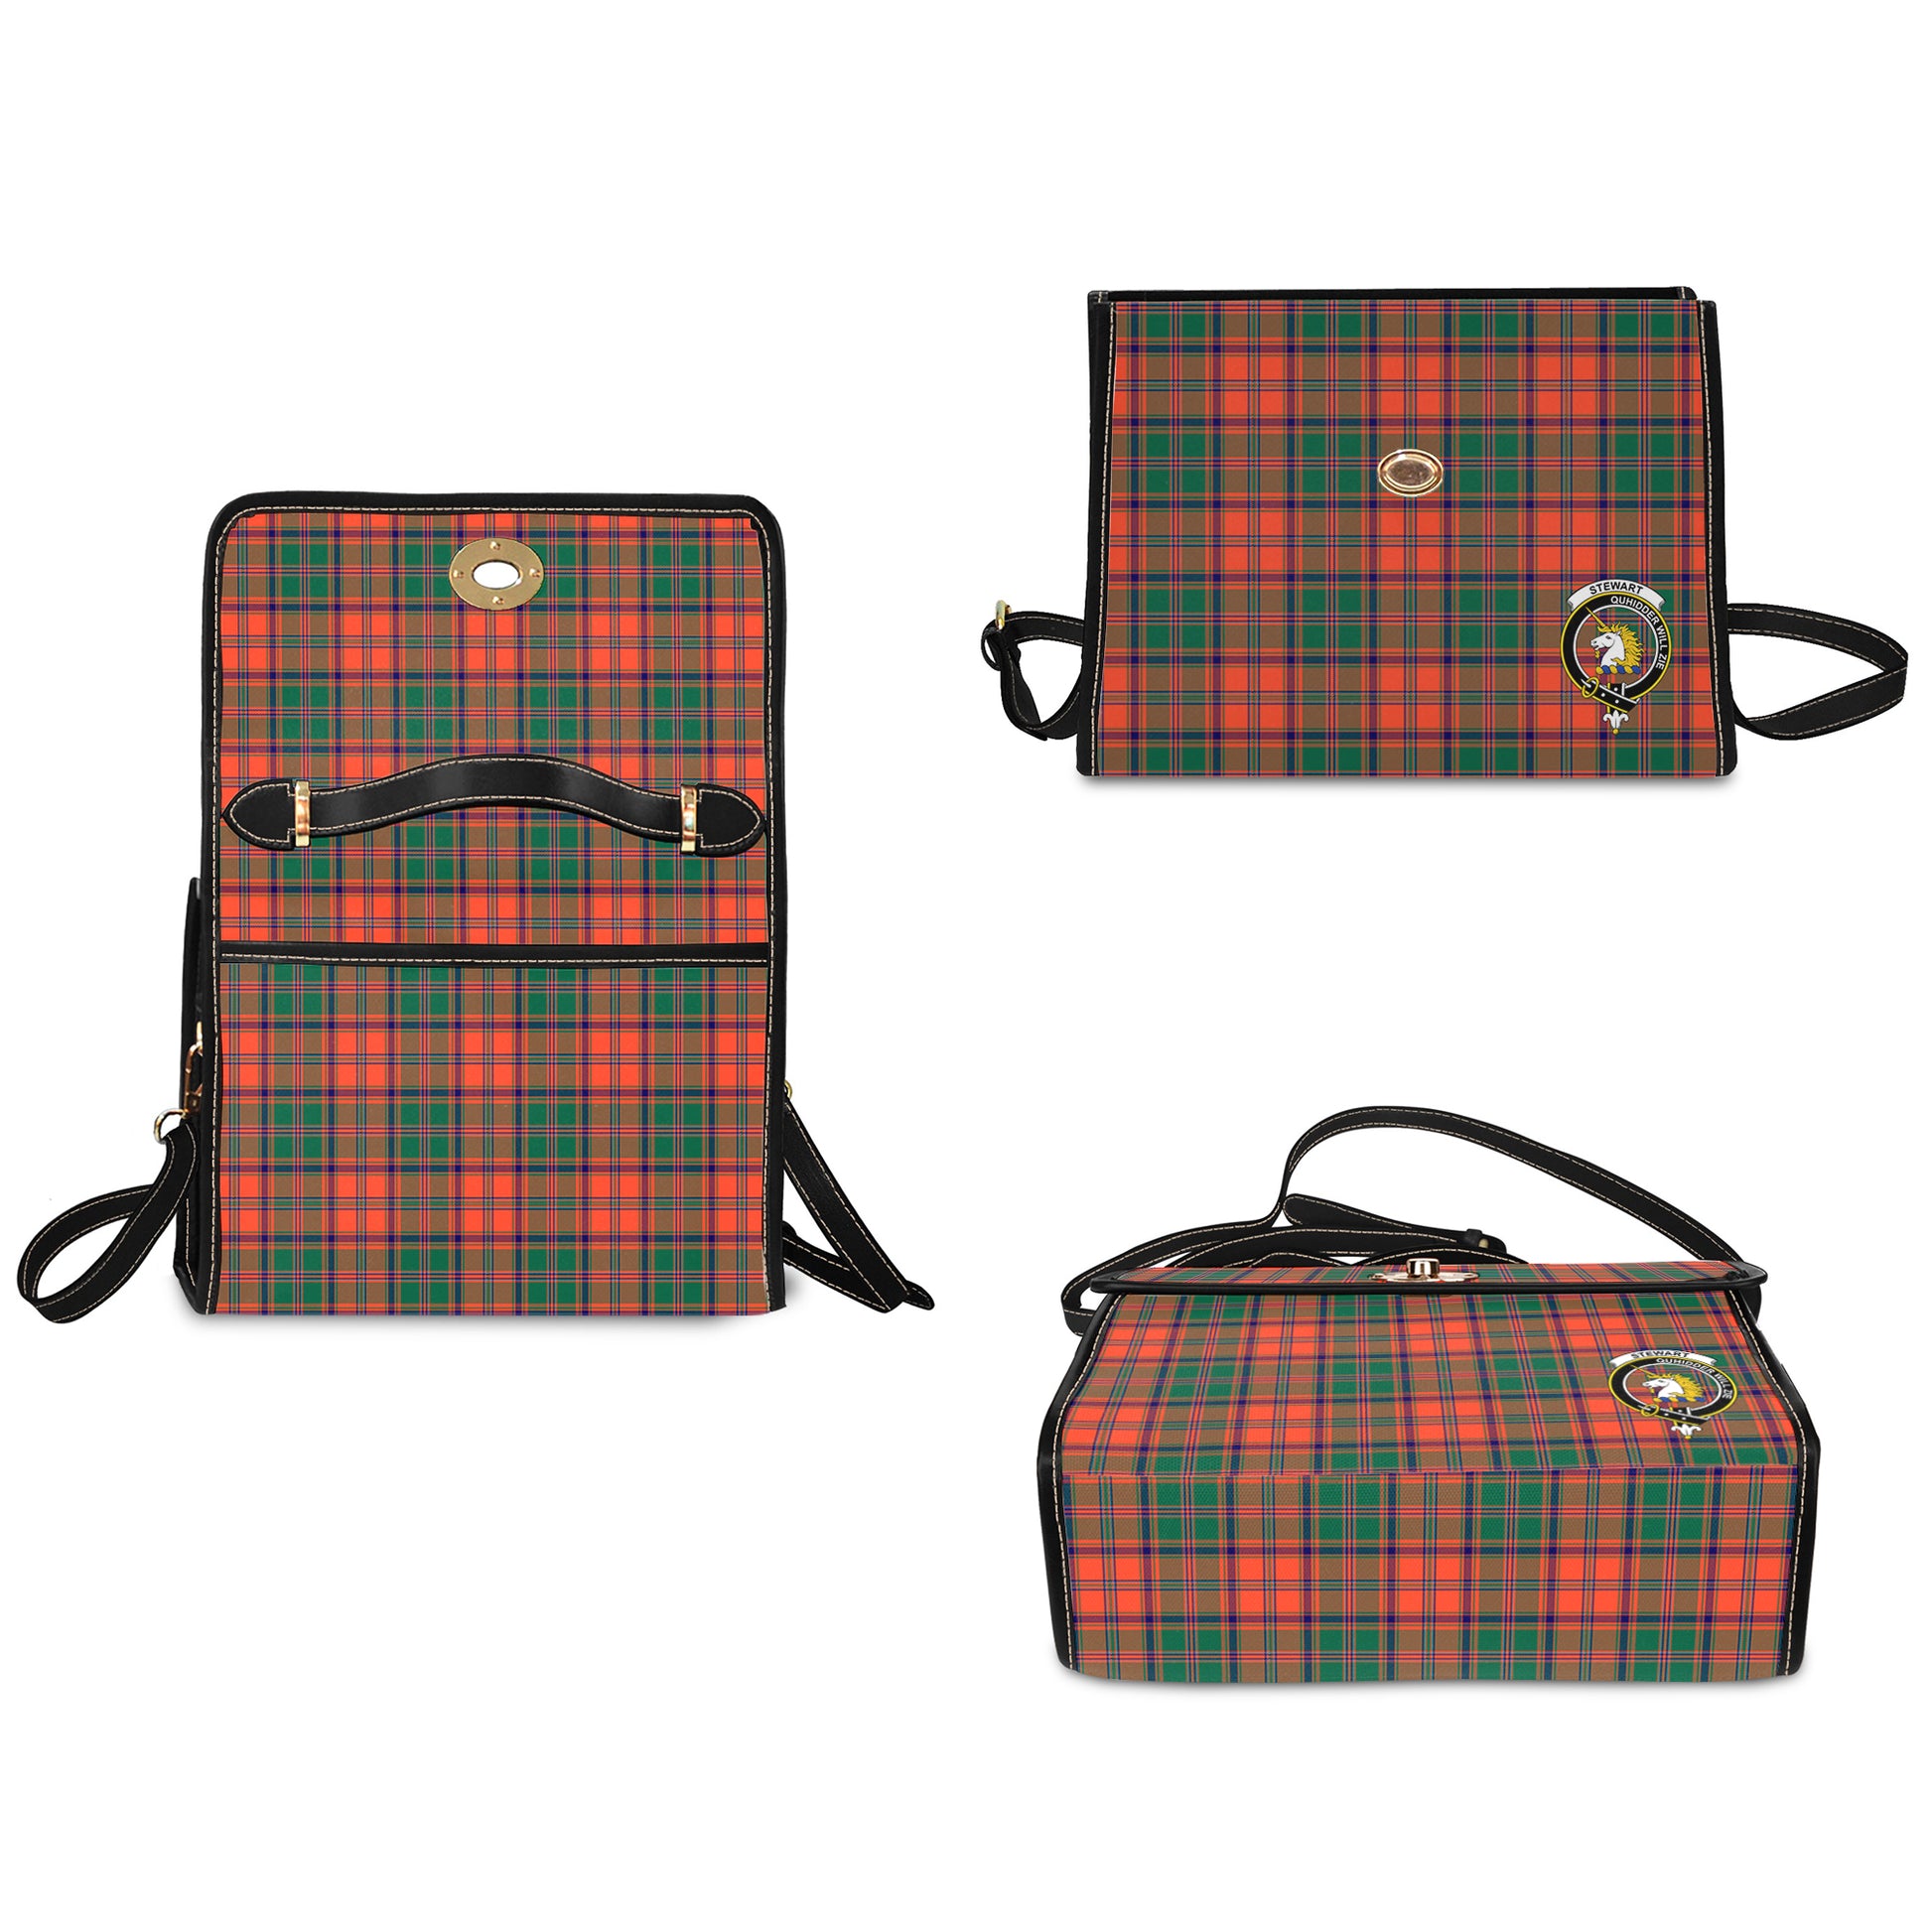 Stewart of Appin Ancient Tartan Leather Strap Waterproof Canvas Bag with Family Crest - Tartanvibesclothing